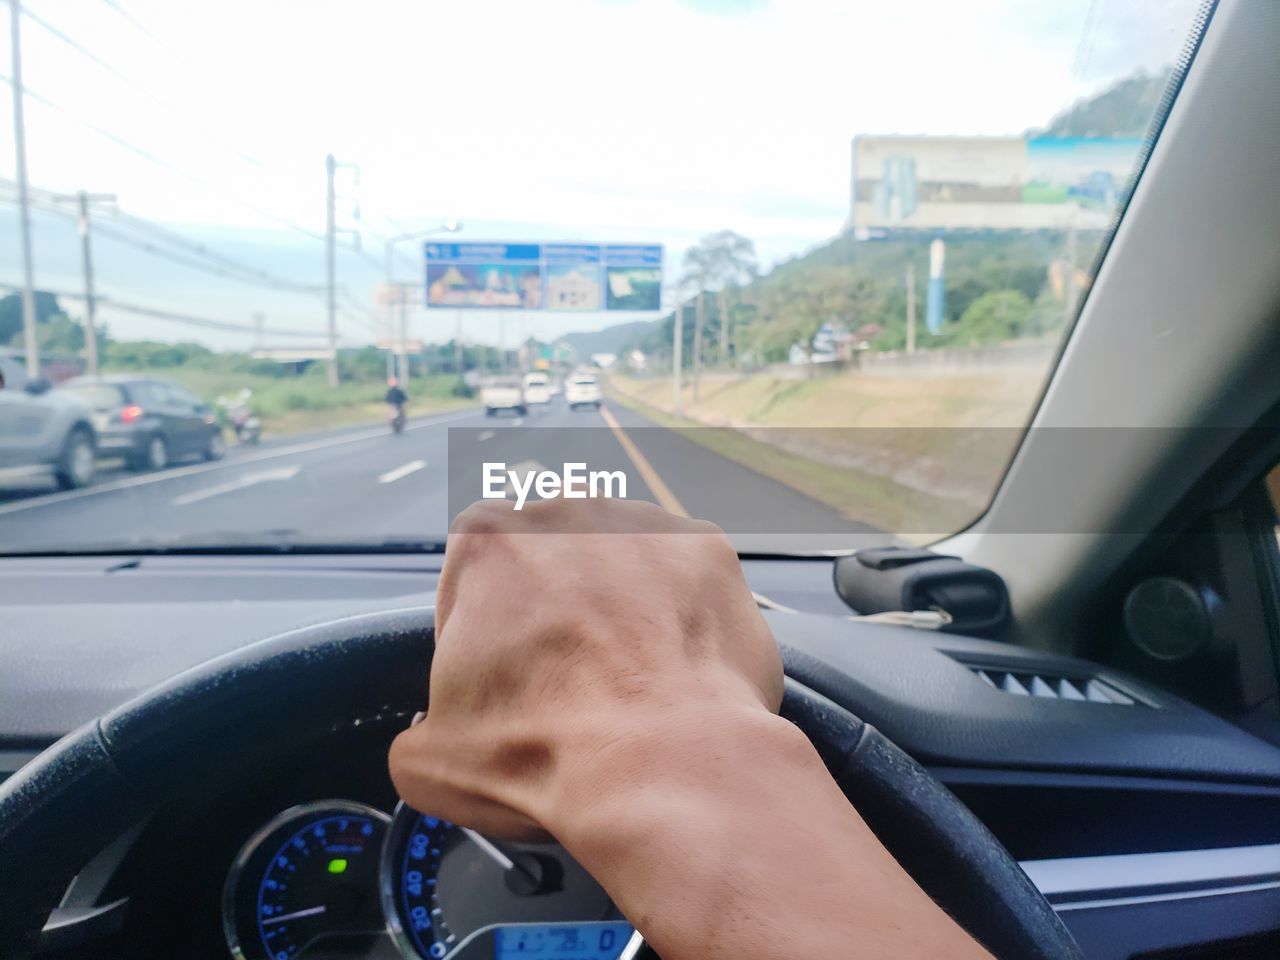 Cropped image of person hand driving car on road